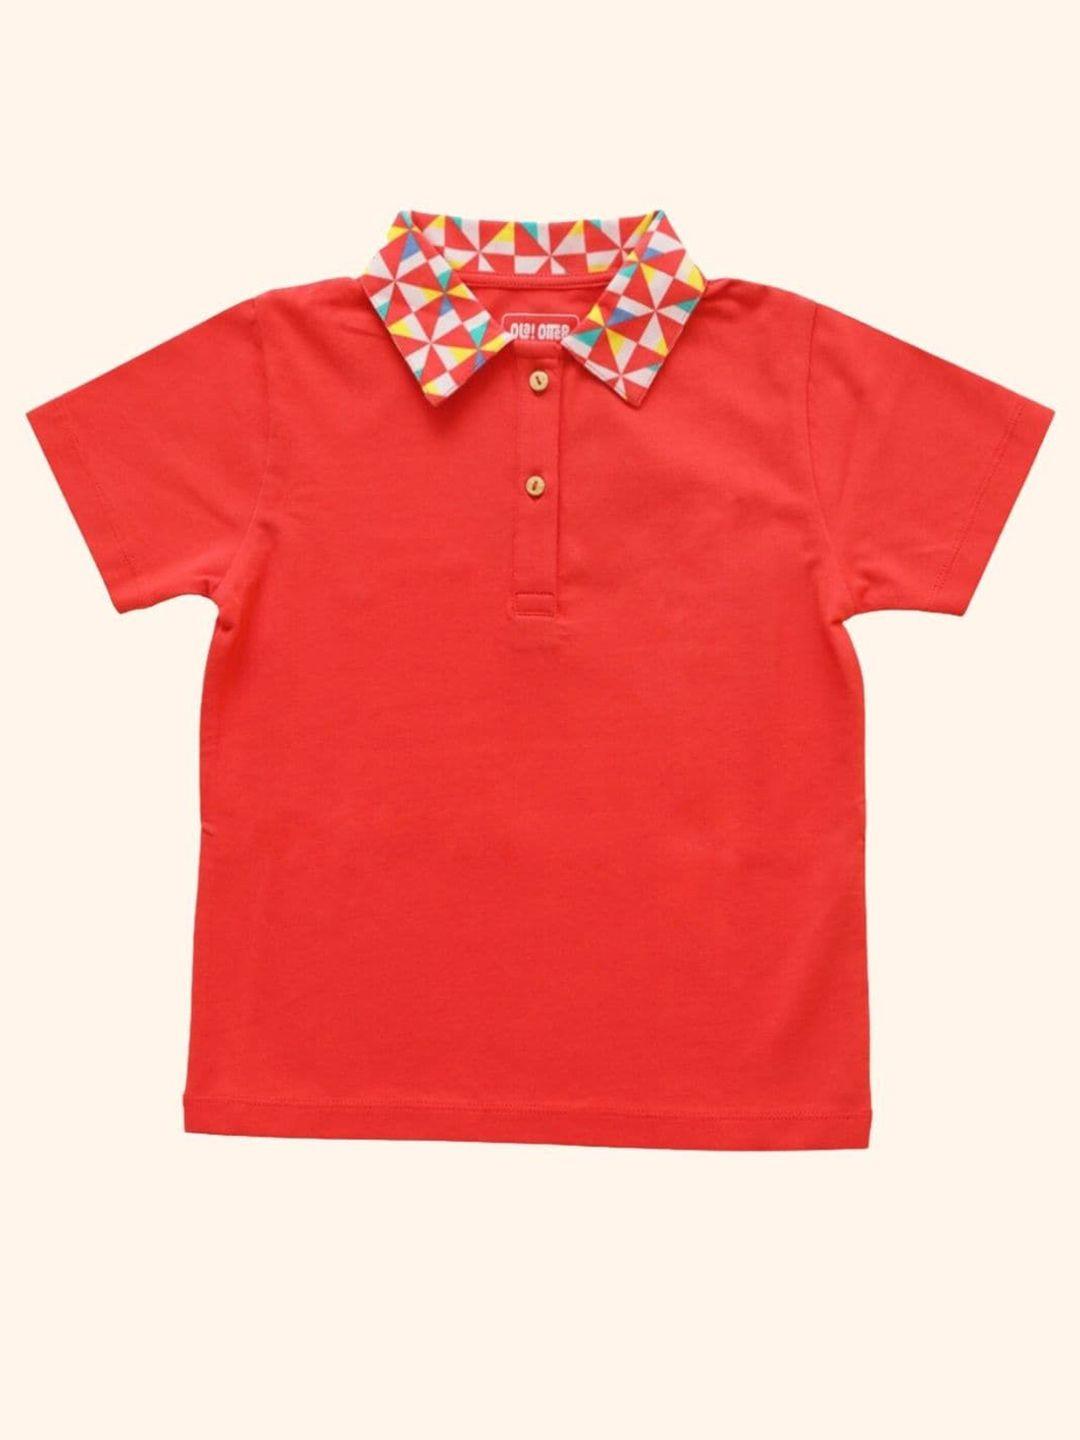 ola! otter boys red floral henley neck organic cotton pockets t-shirt